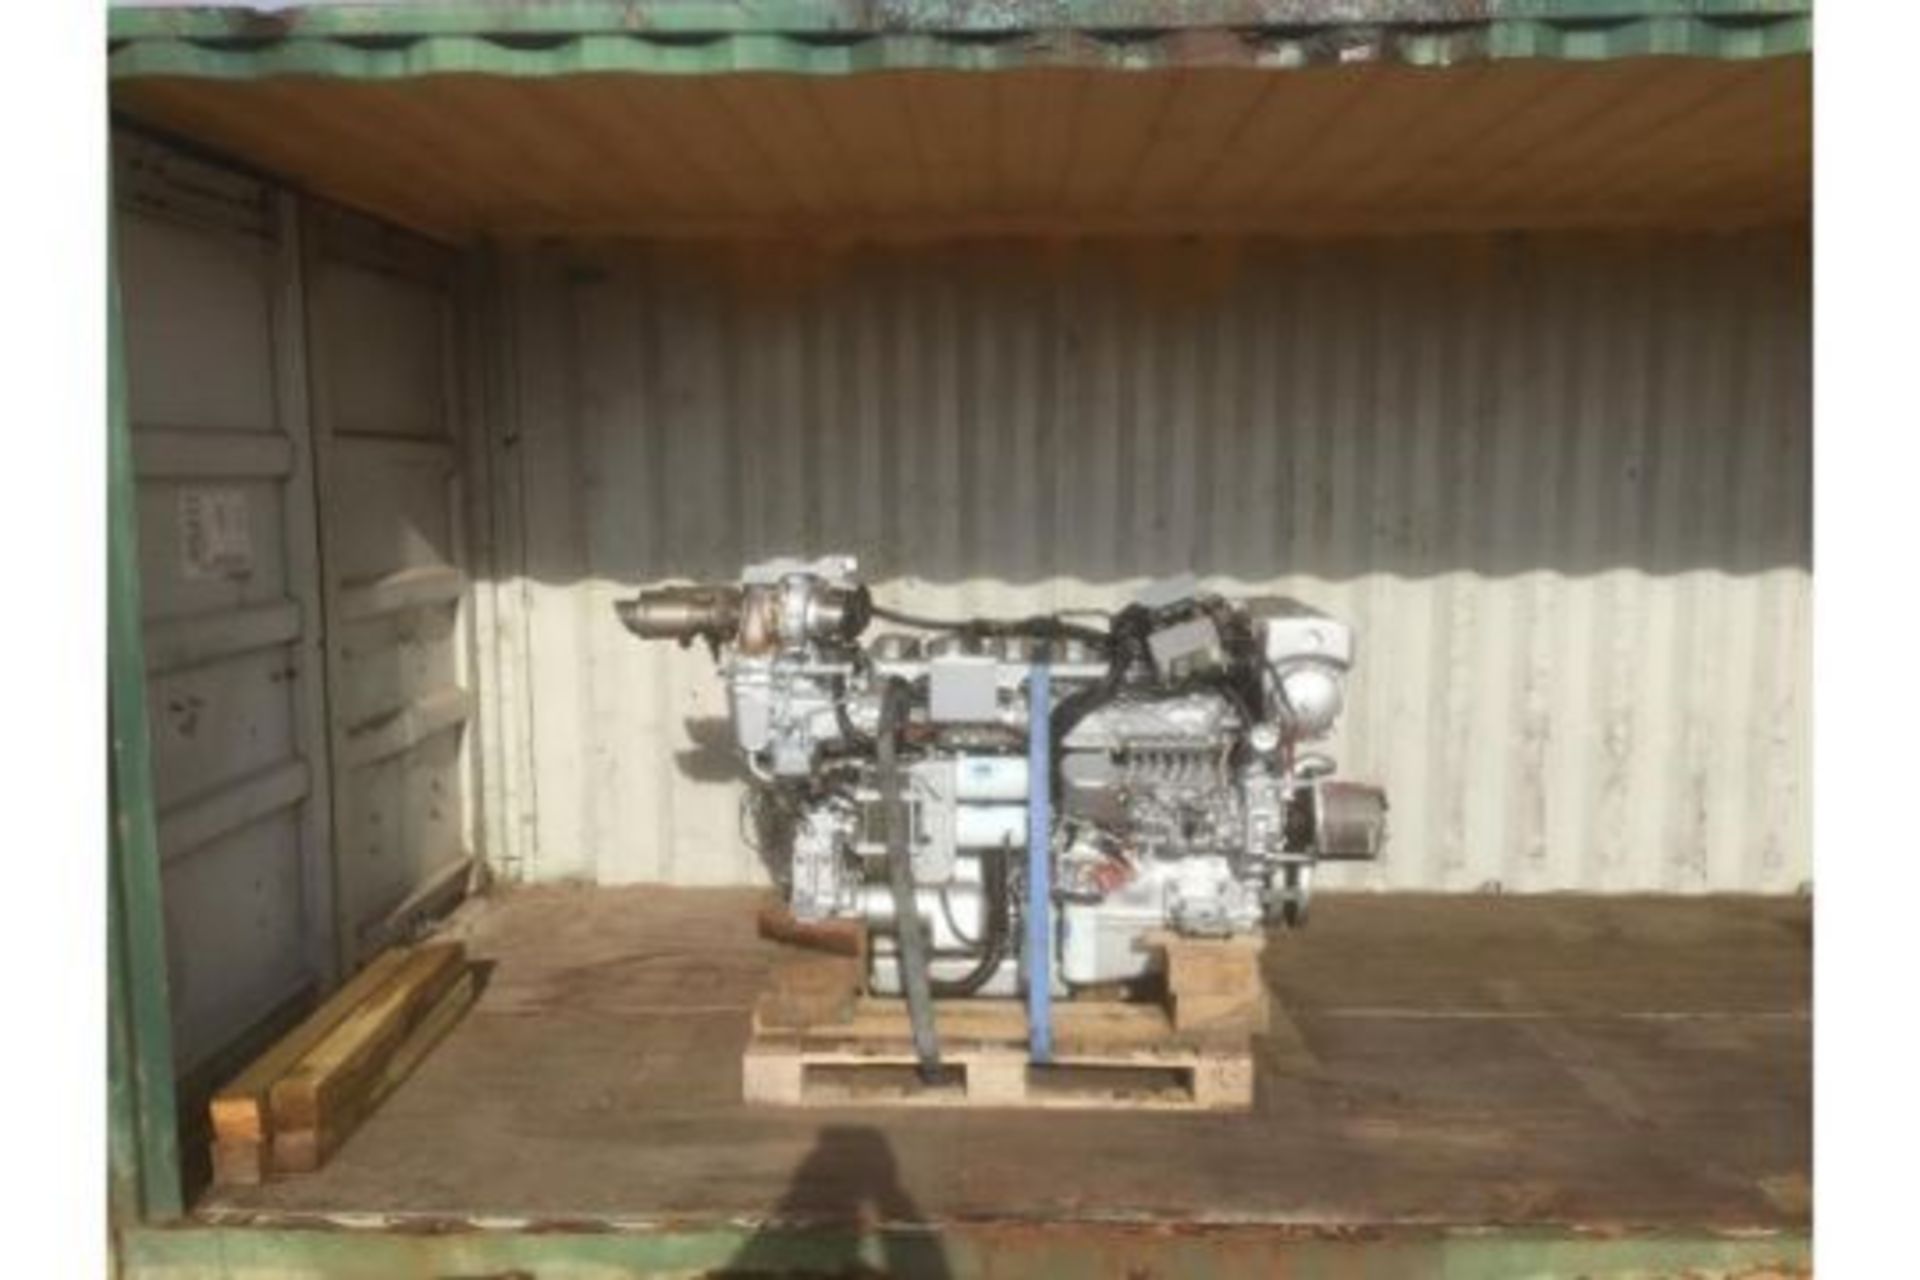 Isotta Fraschini L130GTS 748hp Marine Diesel engine Low hours - Image 4 of 5